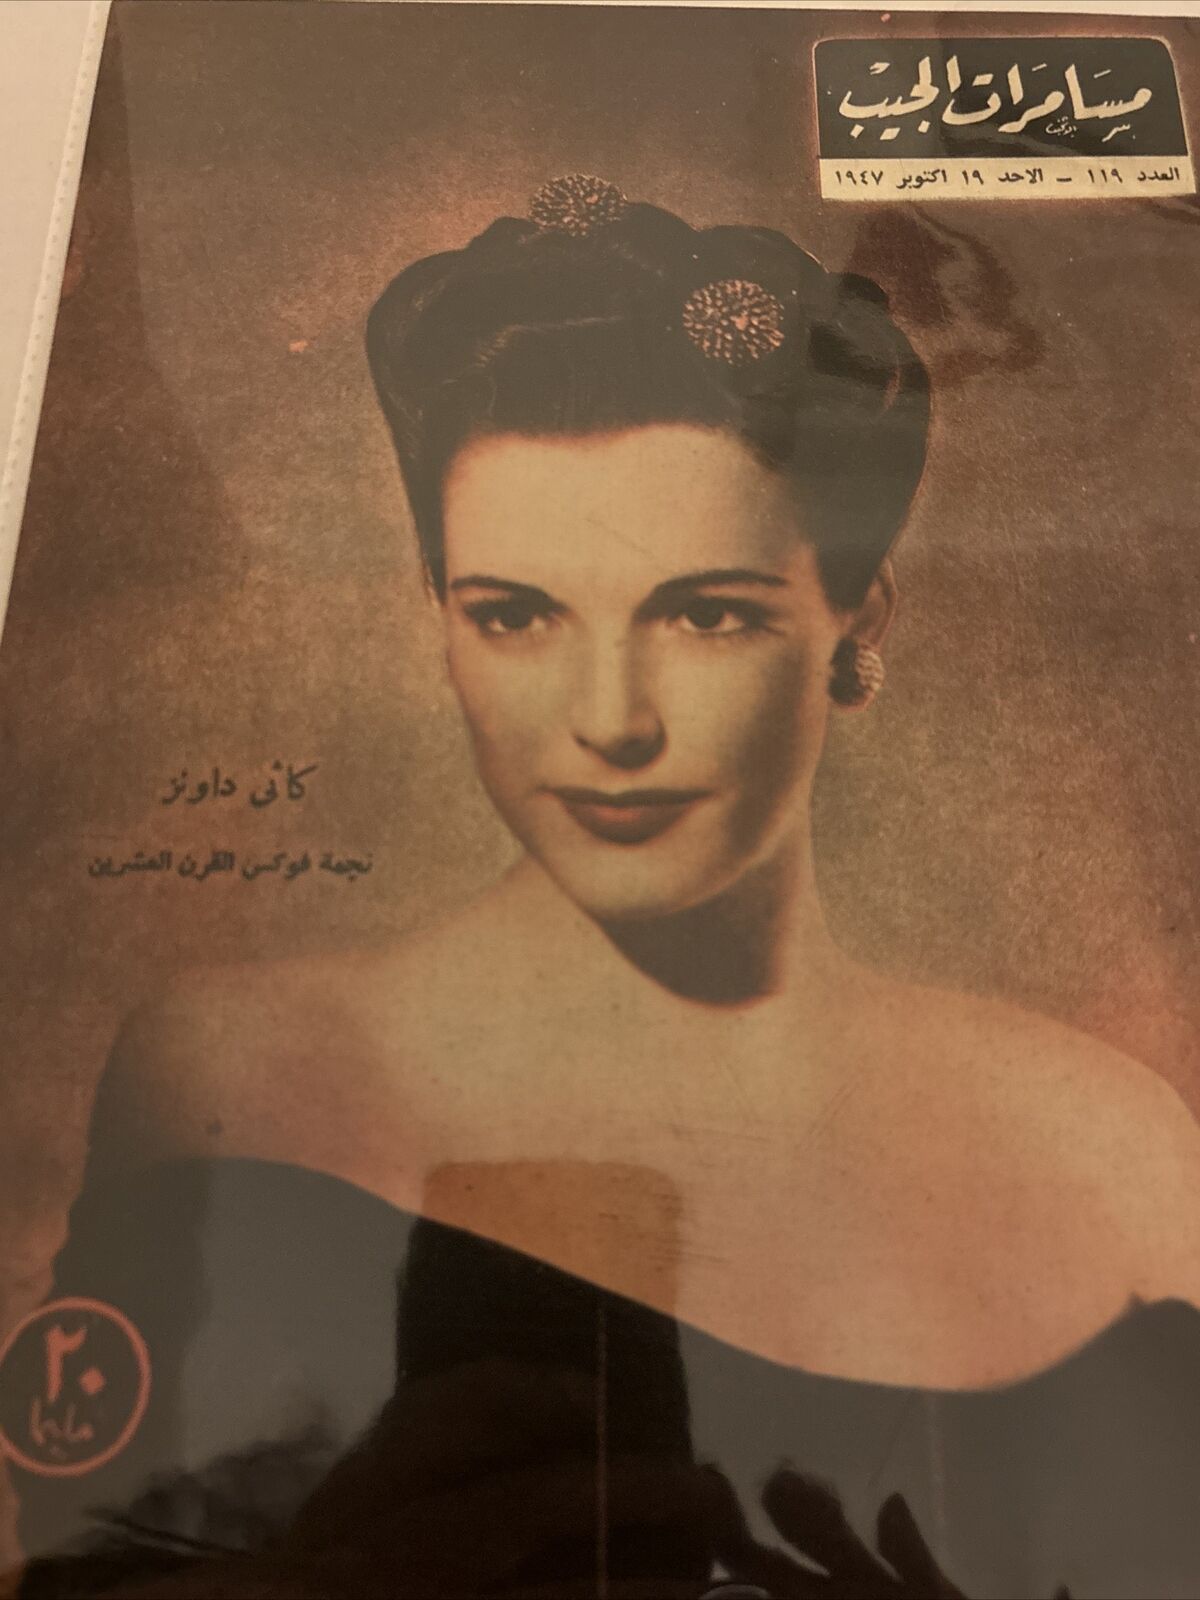 1947 Arabic Magazine Actress Cathy Downs Cover Scarce Hollywood